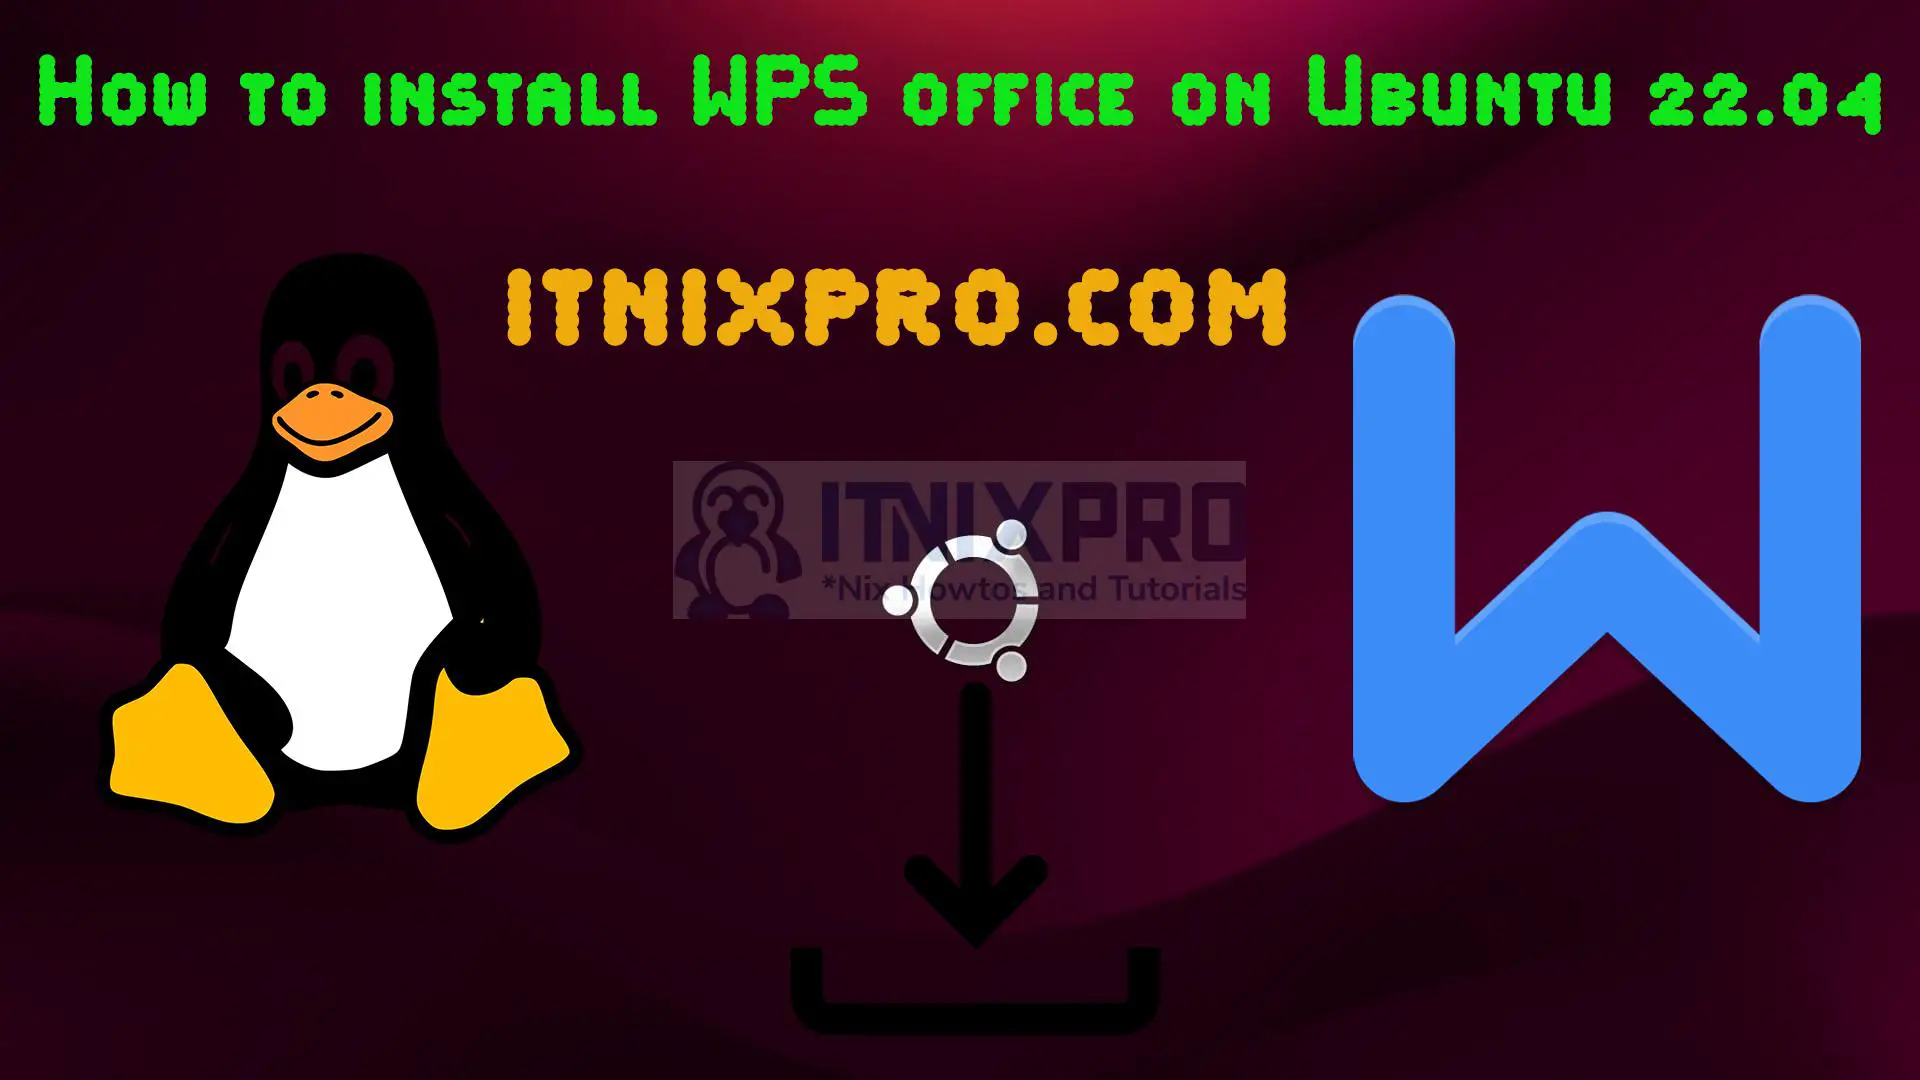 How to install WPS office on Ubuntu 22.04